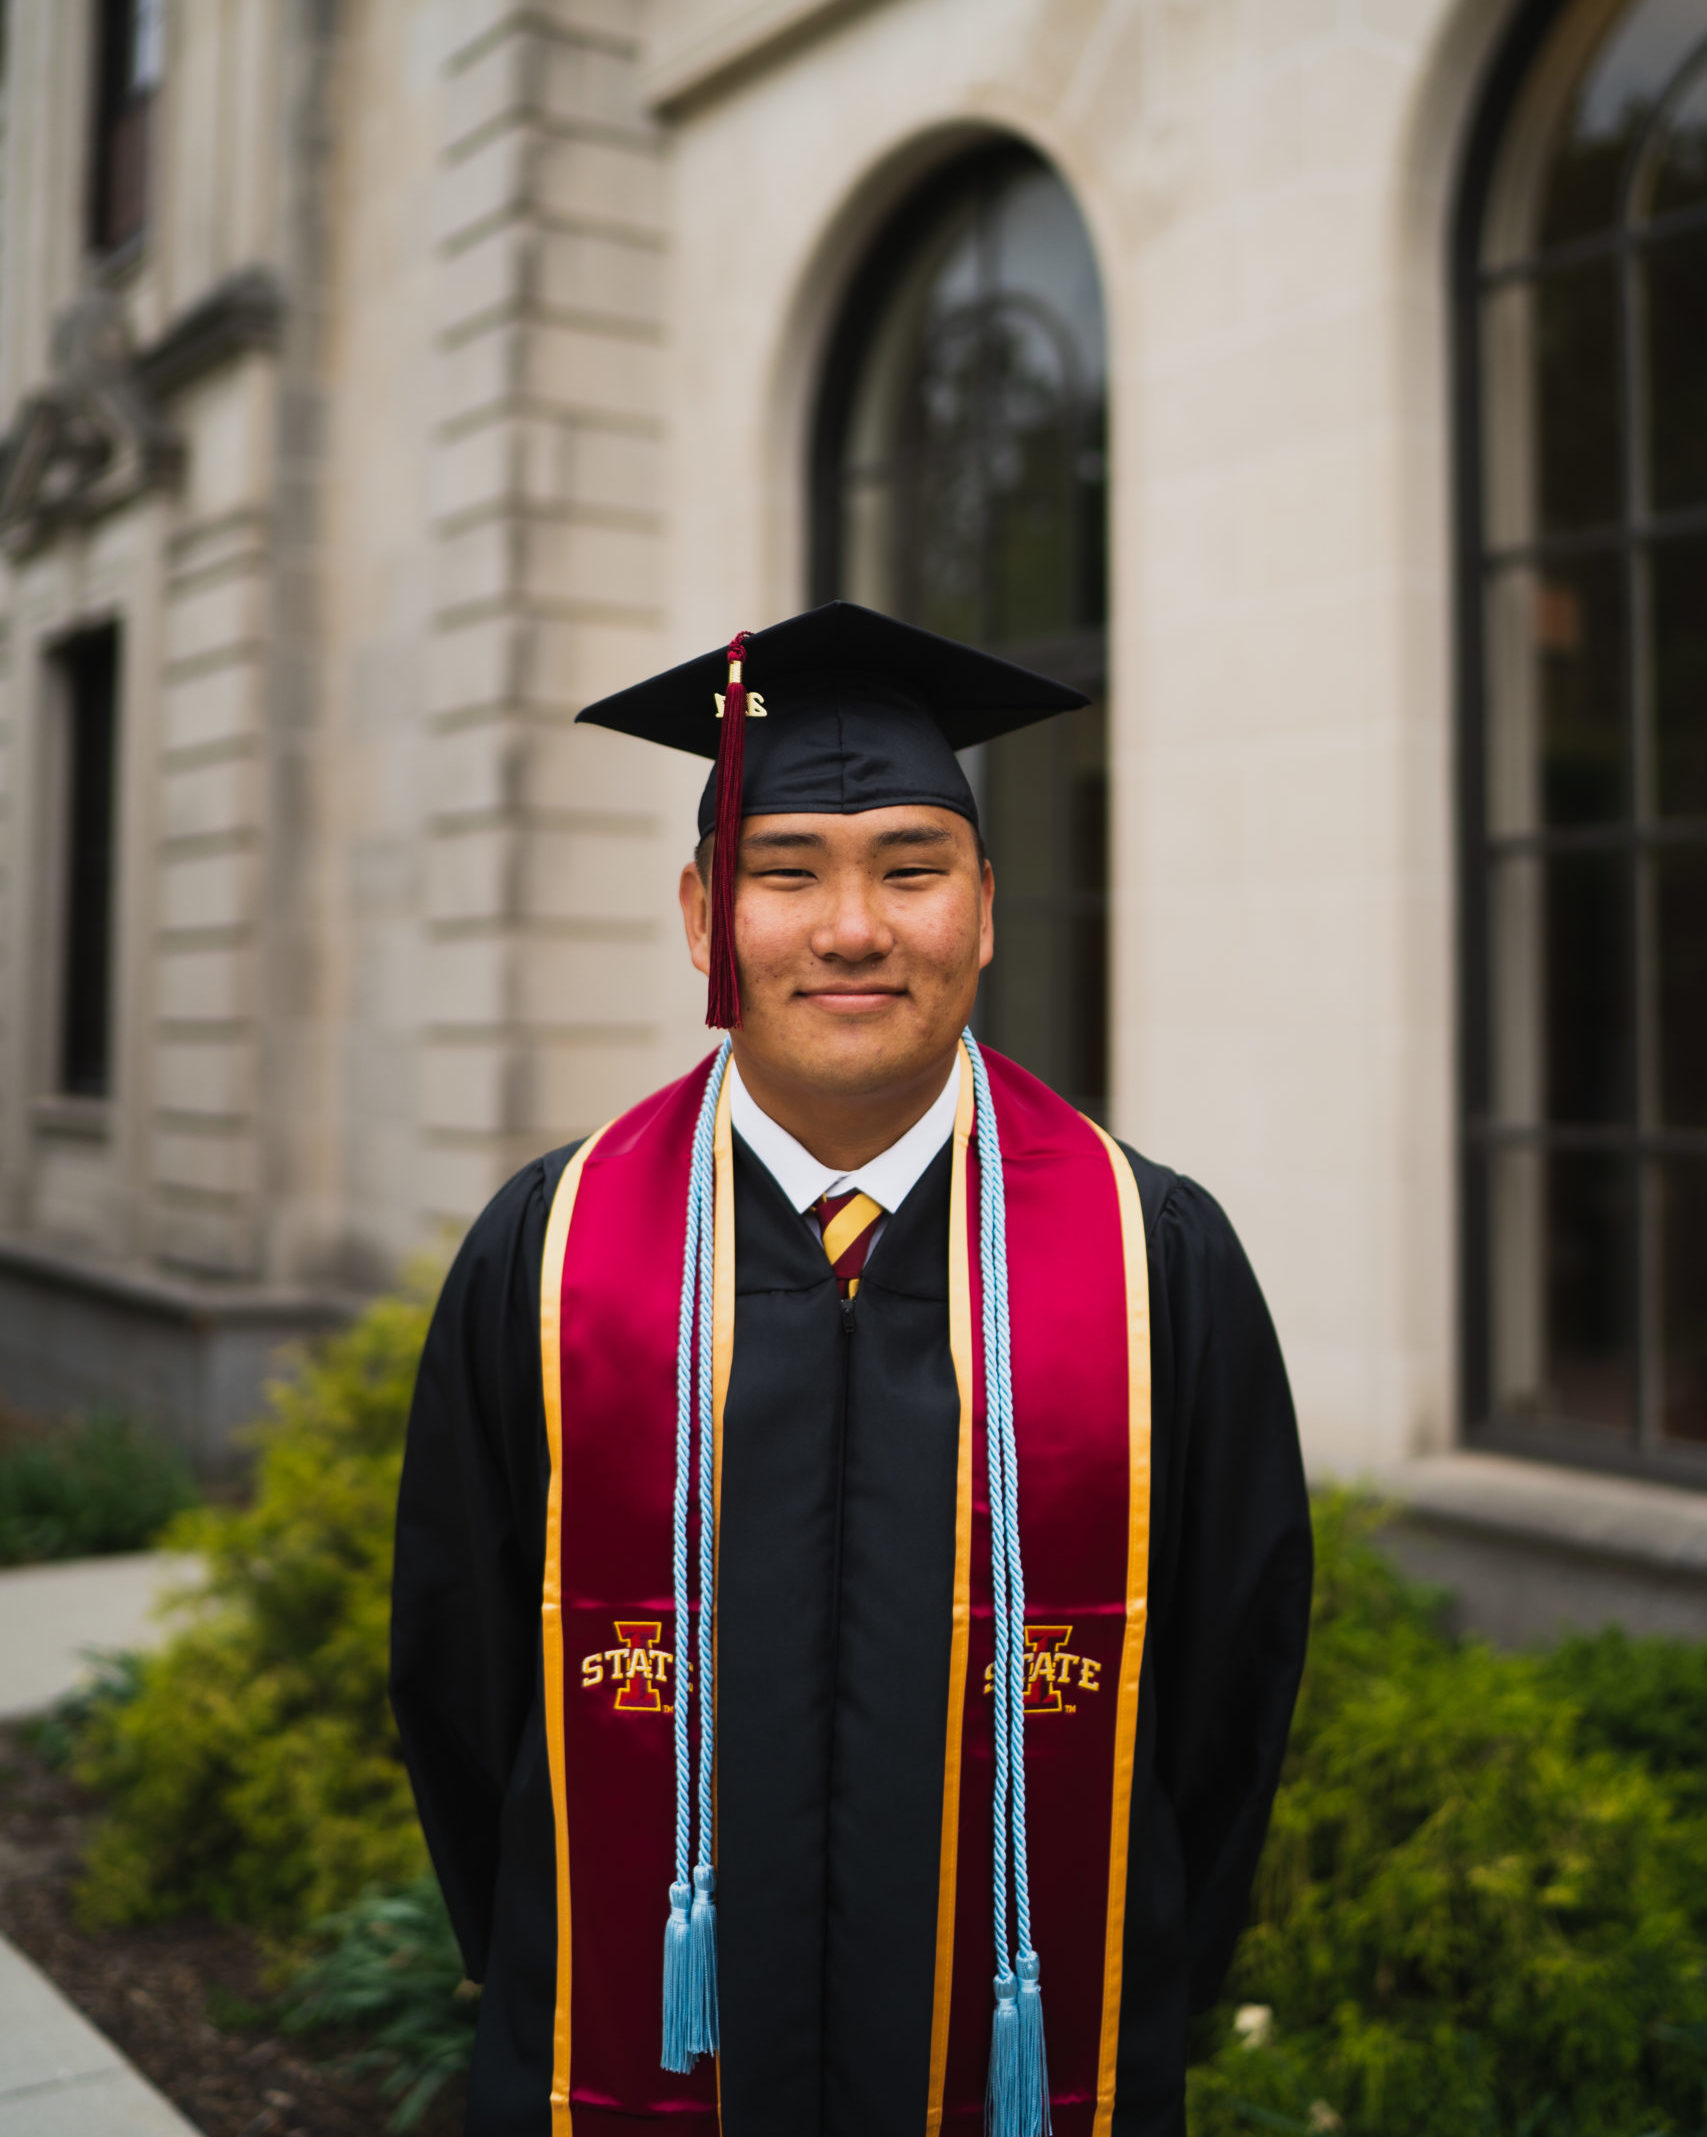 smiling man wearing black graduation cap and gown and burgundy sash